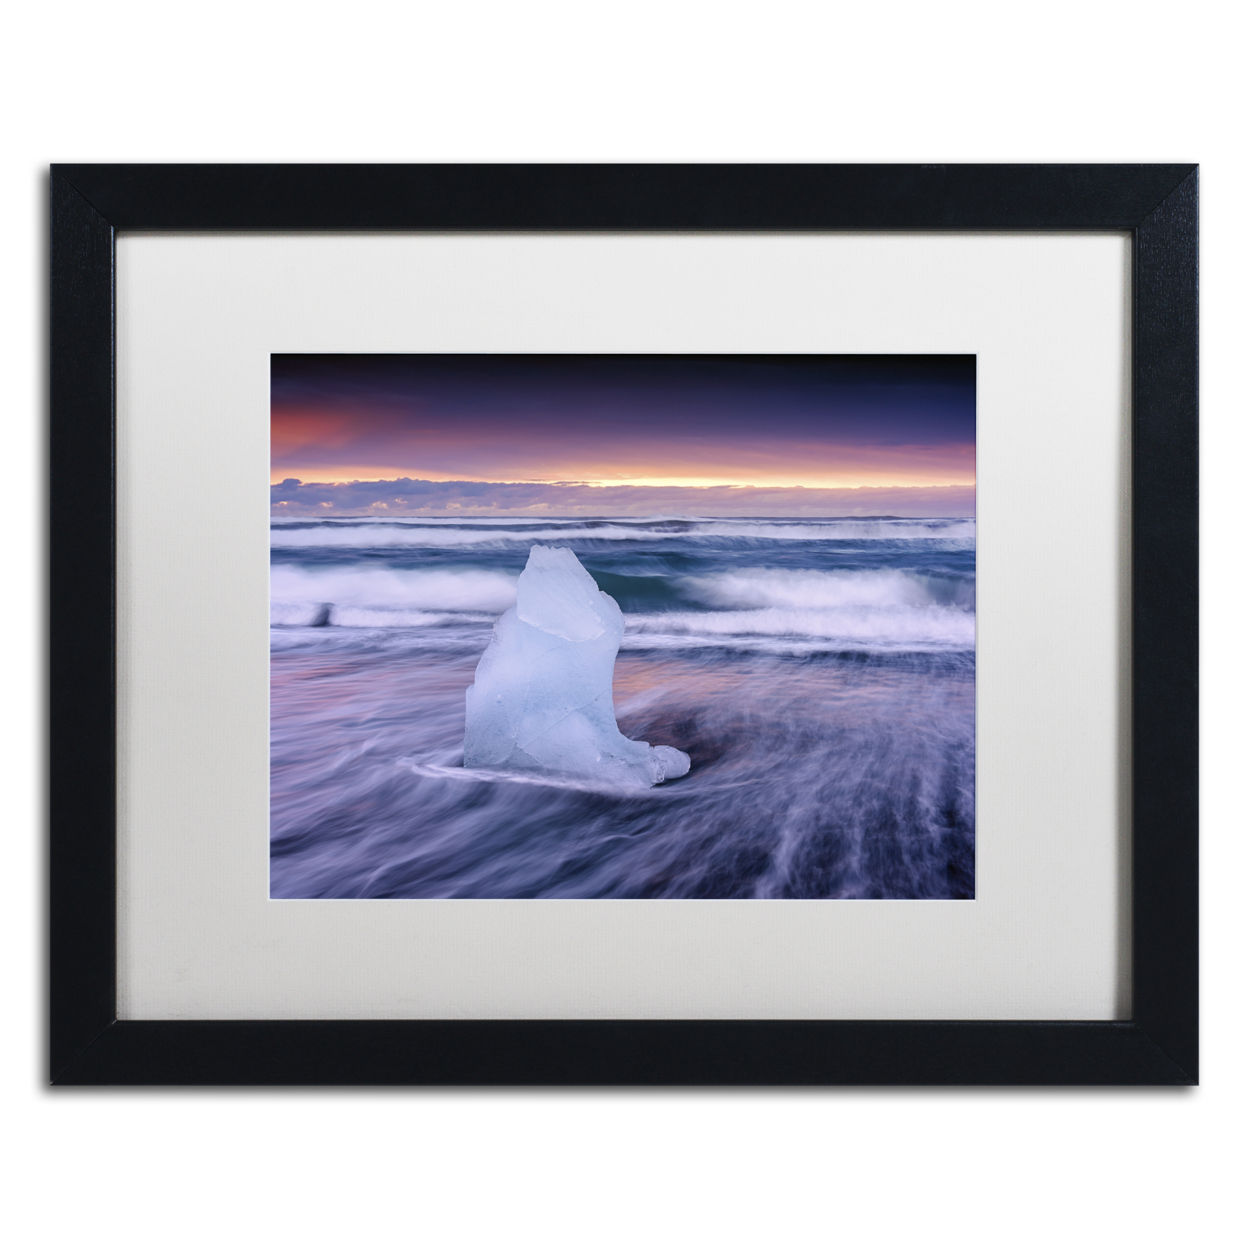 Michael Blanchette Photography 'Surfing' Black Wooden Framed Art 18 X 22 Inches